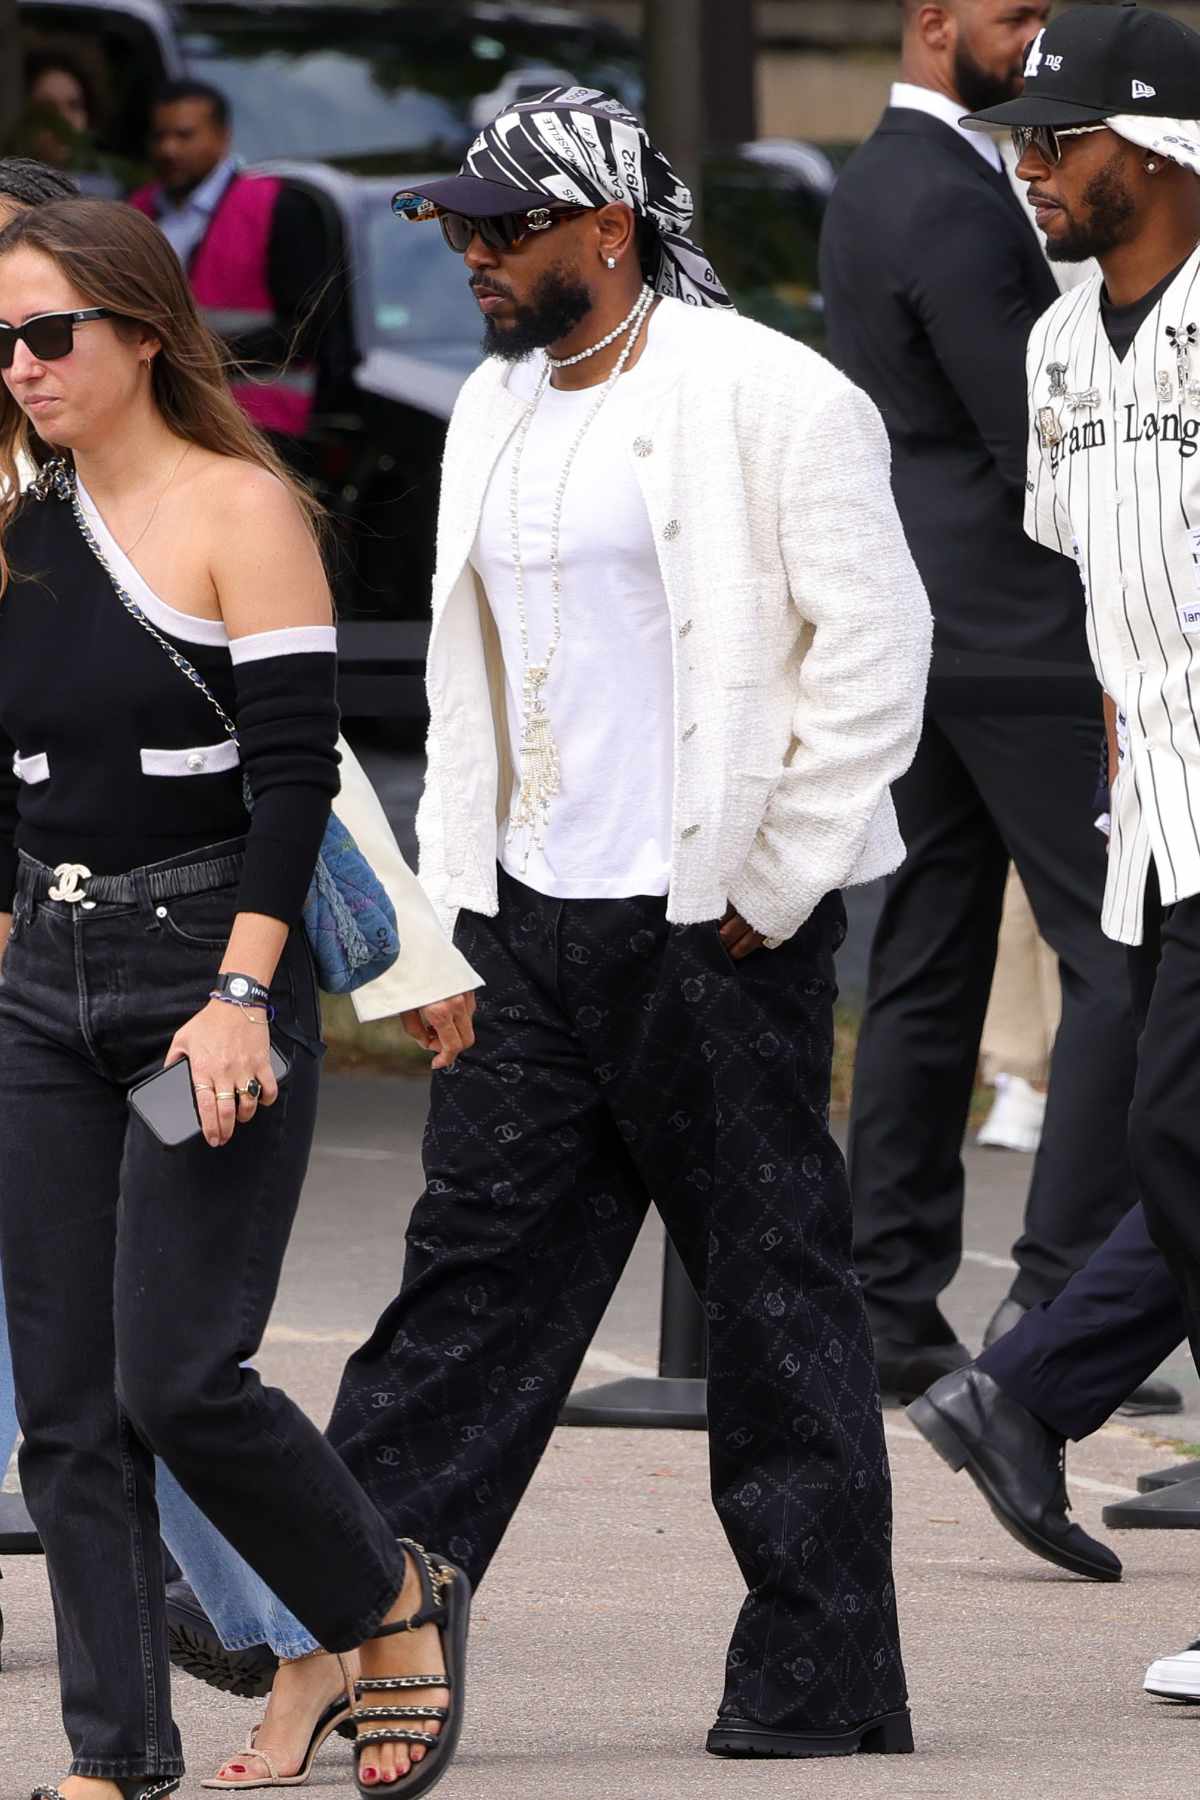 Chanel: Why we love Kendick Lamar's outfit